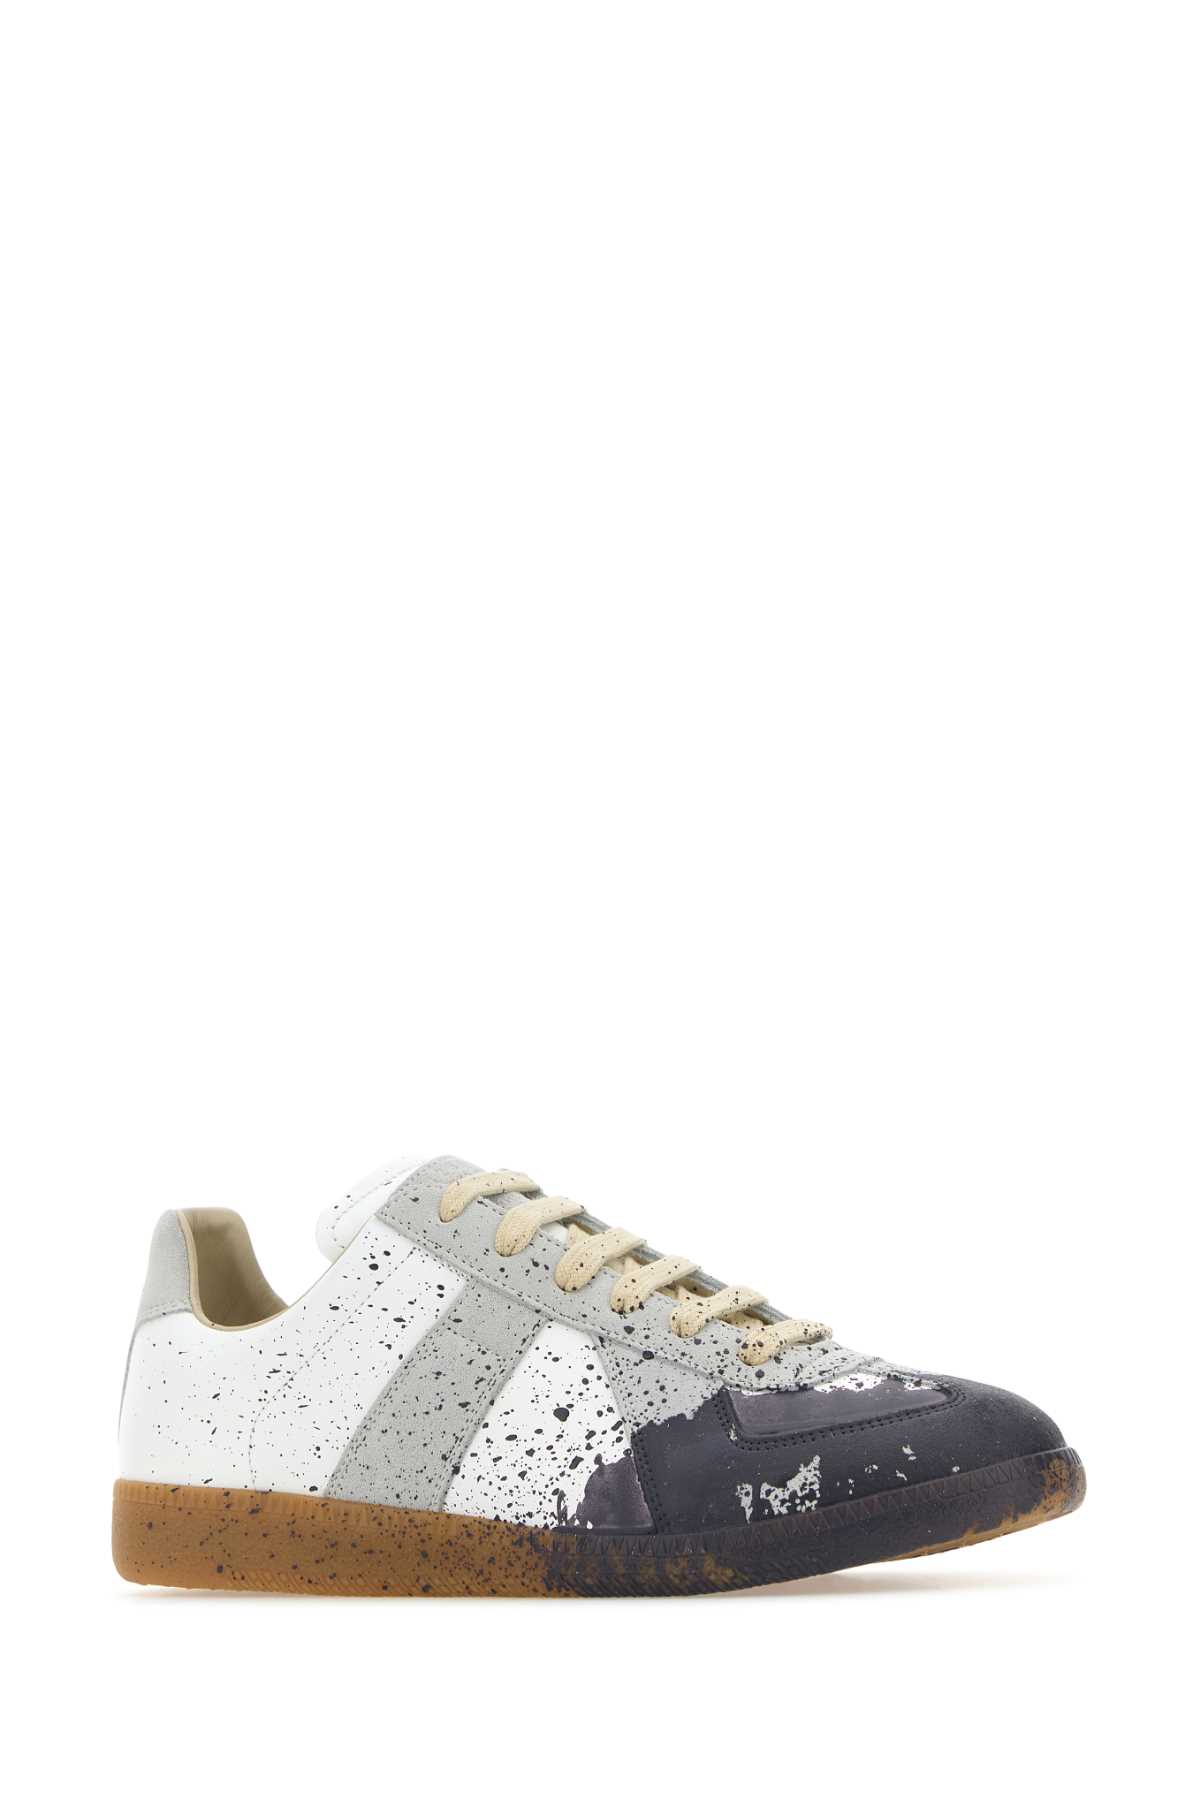 Maison Margiela Multicolor Leather Replica Sneakers In Whitepewter